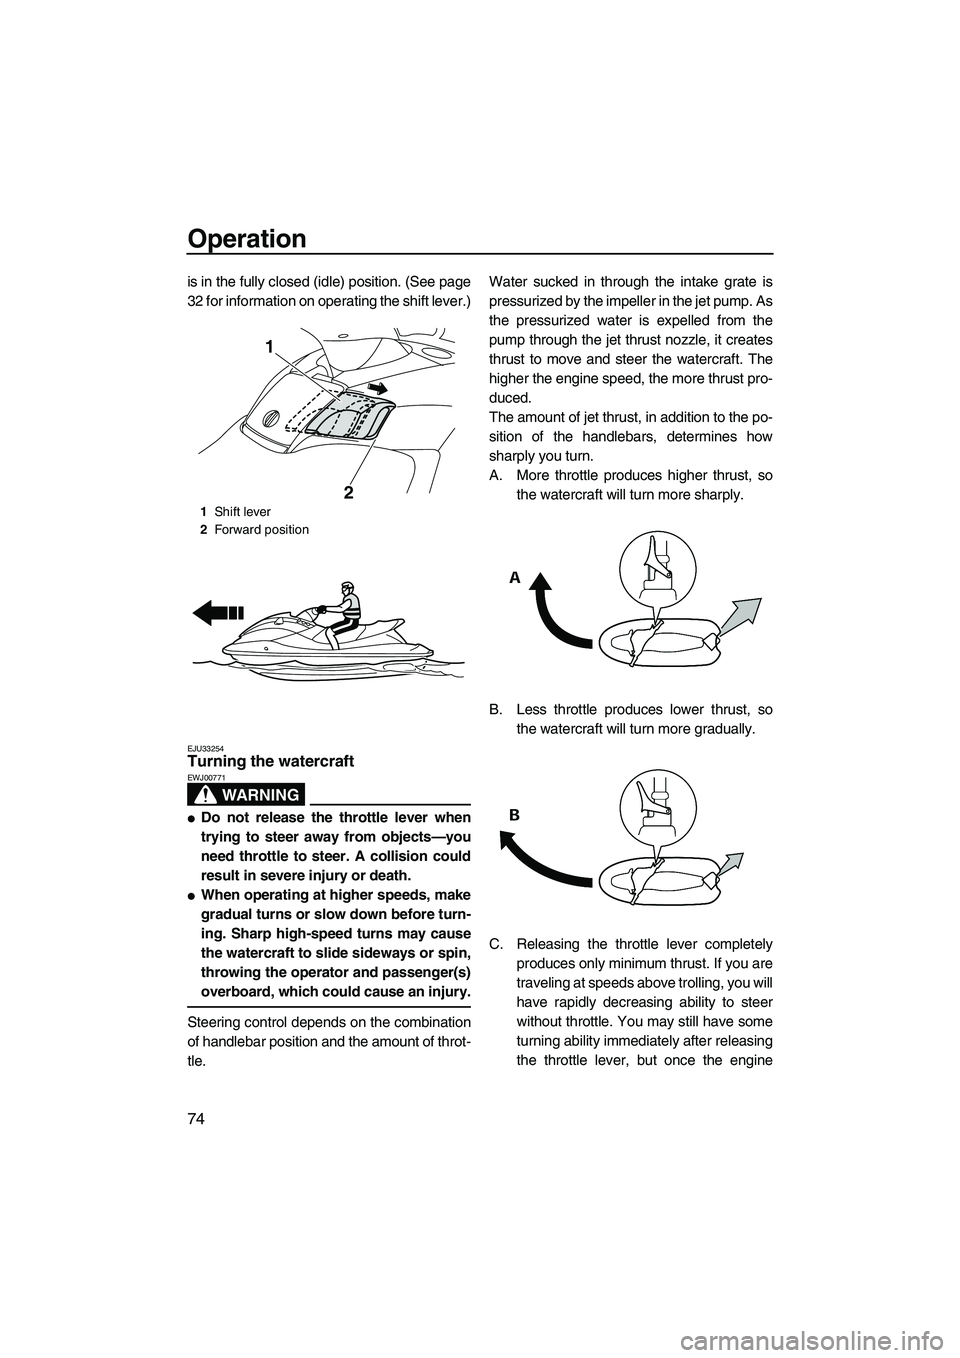 YAMAHA SVHO 2011  Owners Manual Operation
74
is in the fully closed (idle) position. (See page
32 for information on operating the shift lever.)
EJU33254Turning the watercraft 
WARNING
EWJ00771
Do not release the throttle lever whe